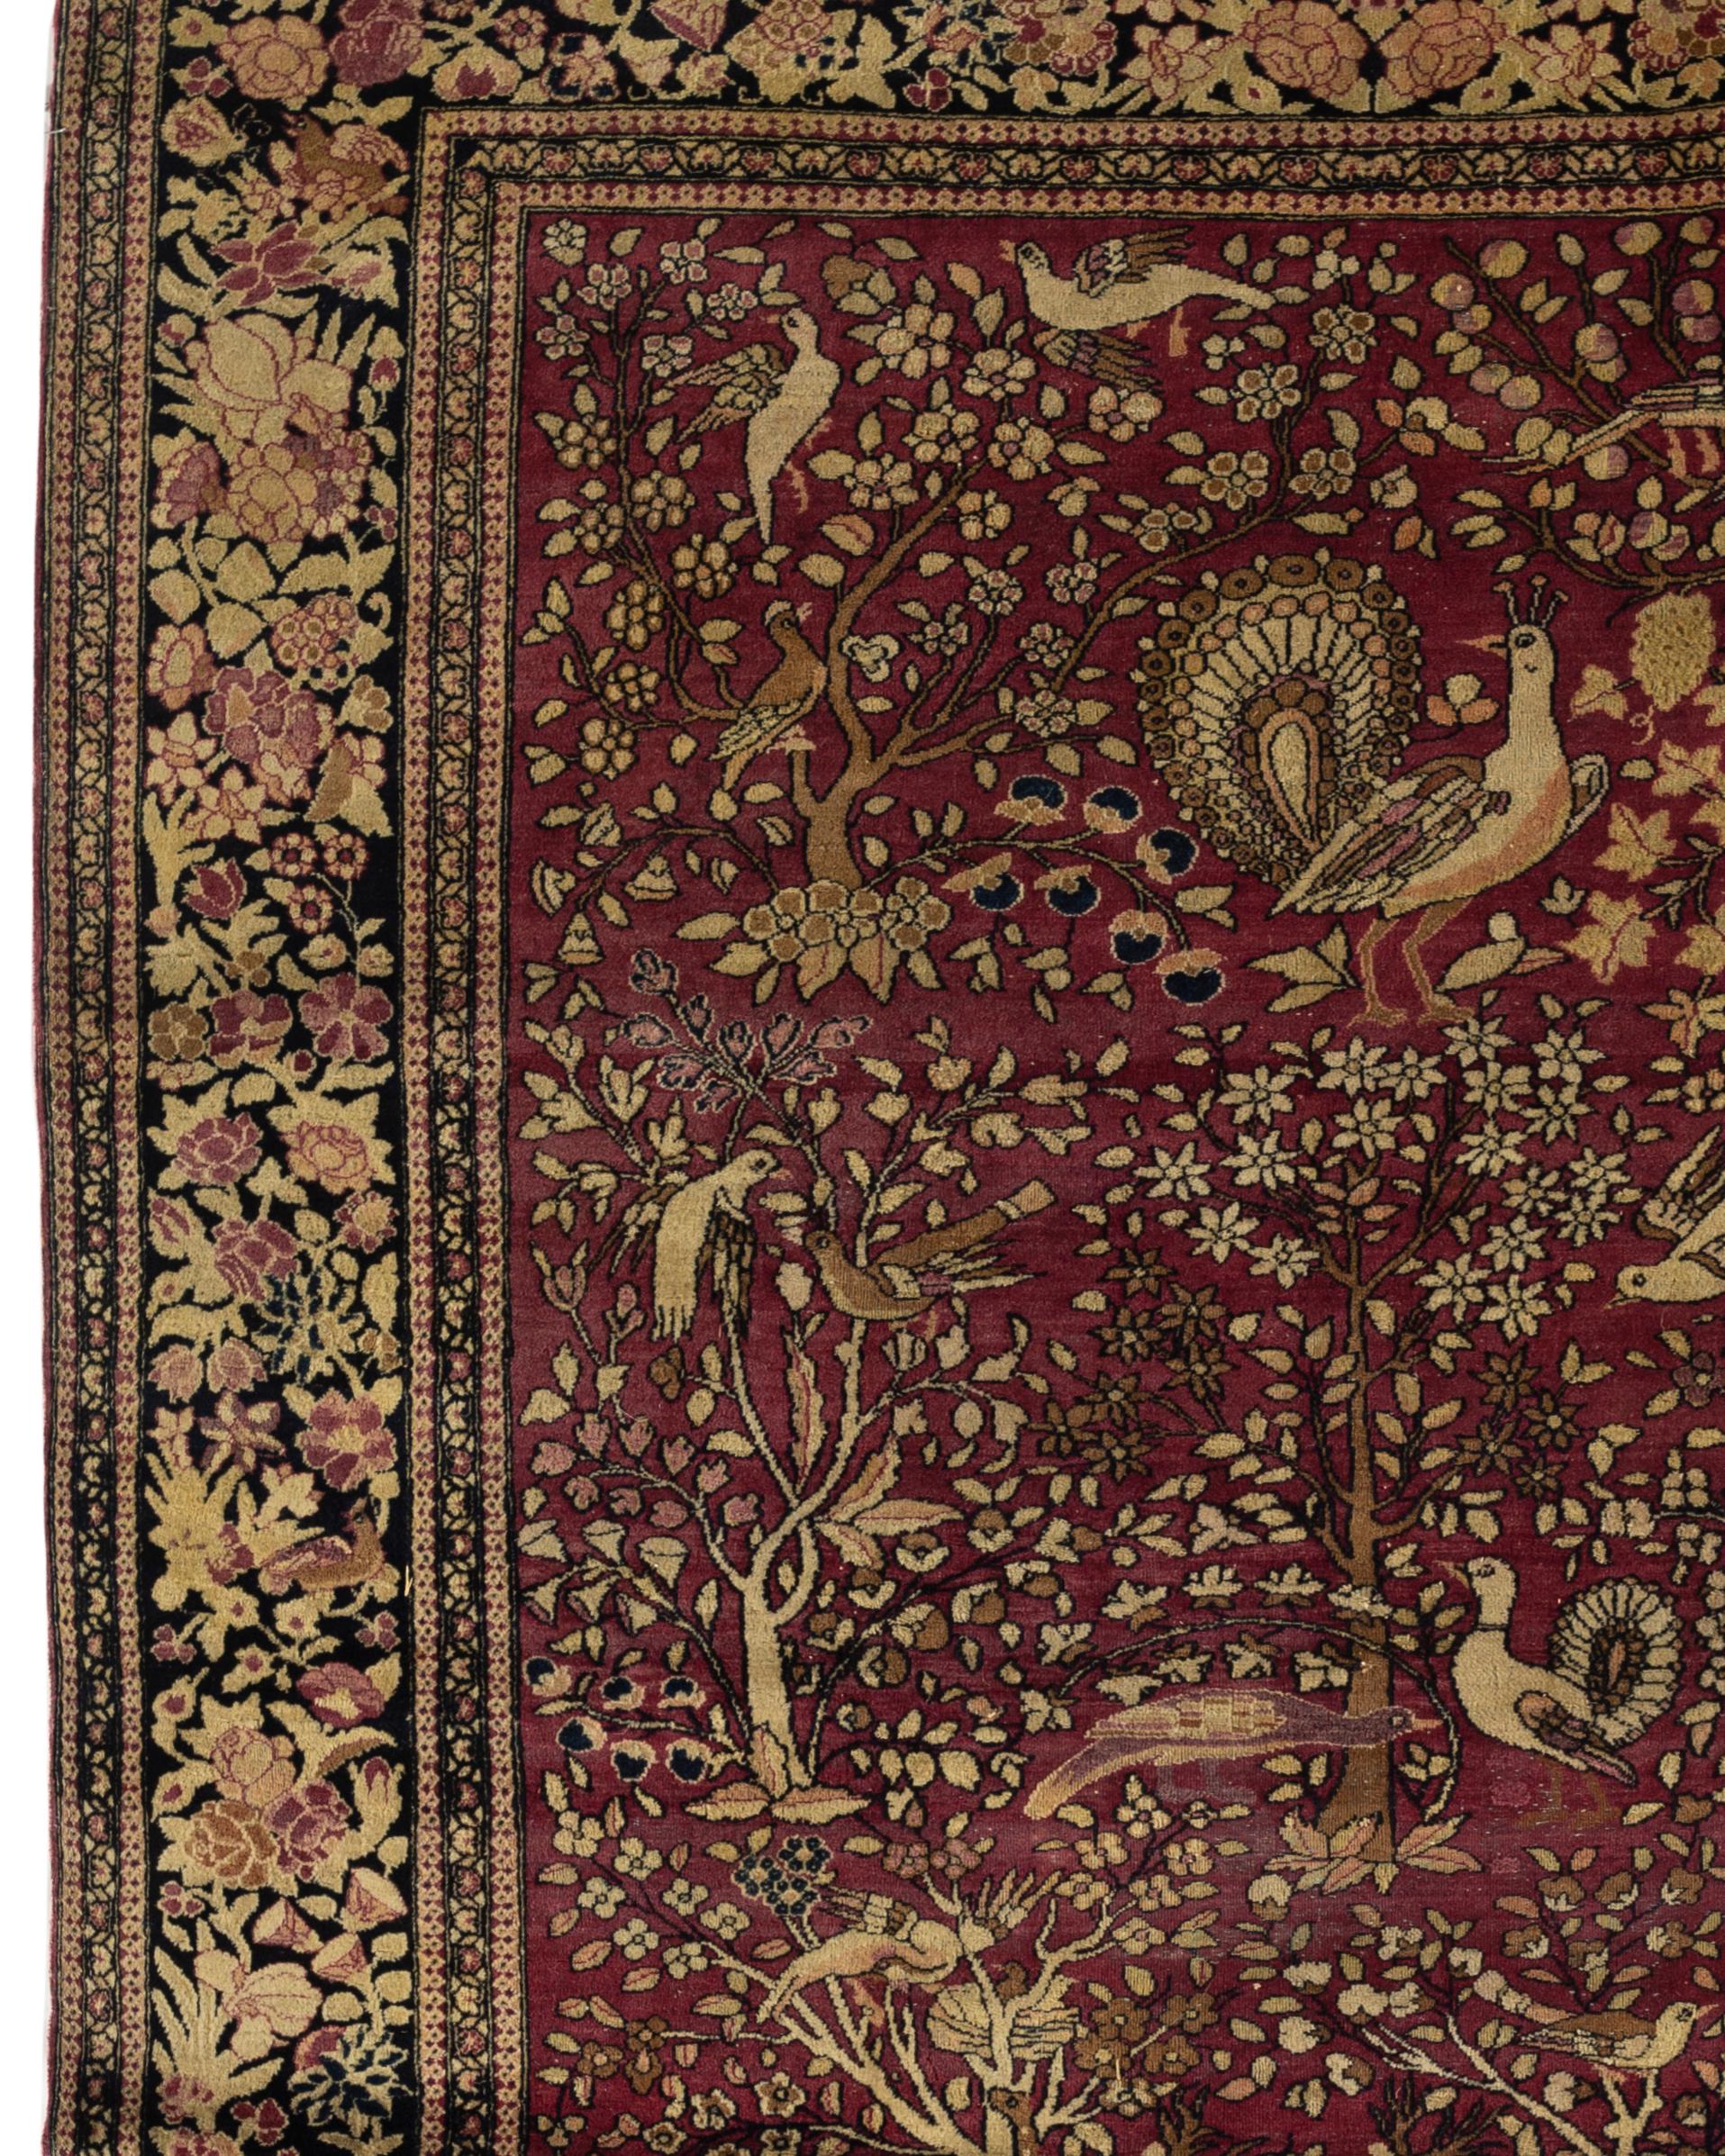 Antique Isphahan Pictorial rug, circa 1880. A delightful small pictorial rug detailing a selection of animals and birds with trees and leaves, the Elephant at the bottom of the rug with his trunk pulling on the tree with birds sitting is